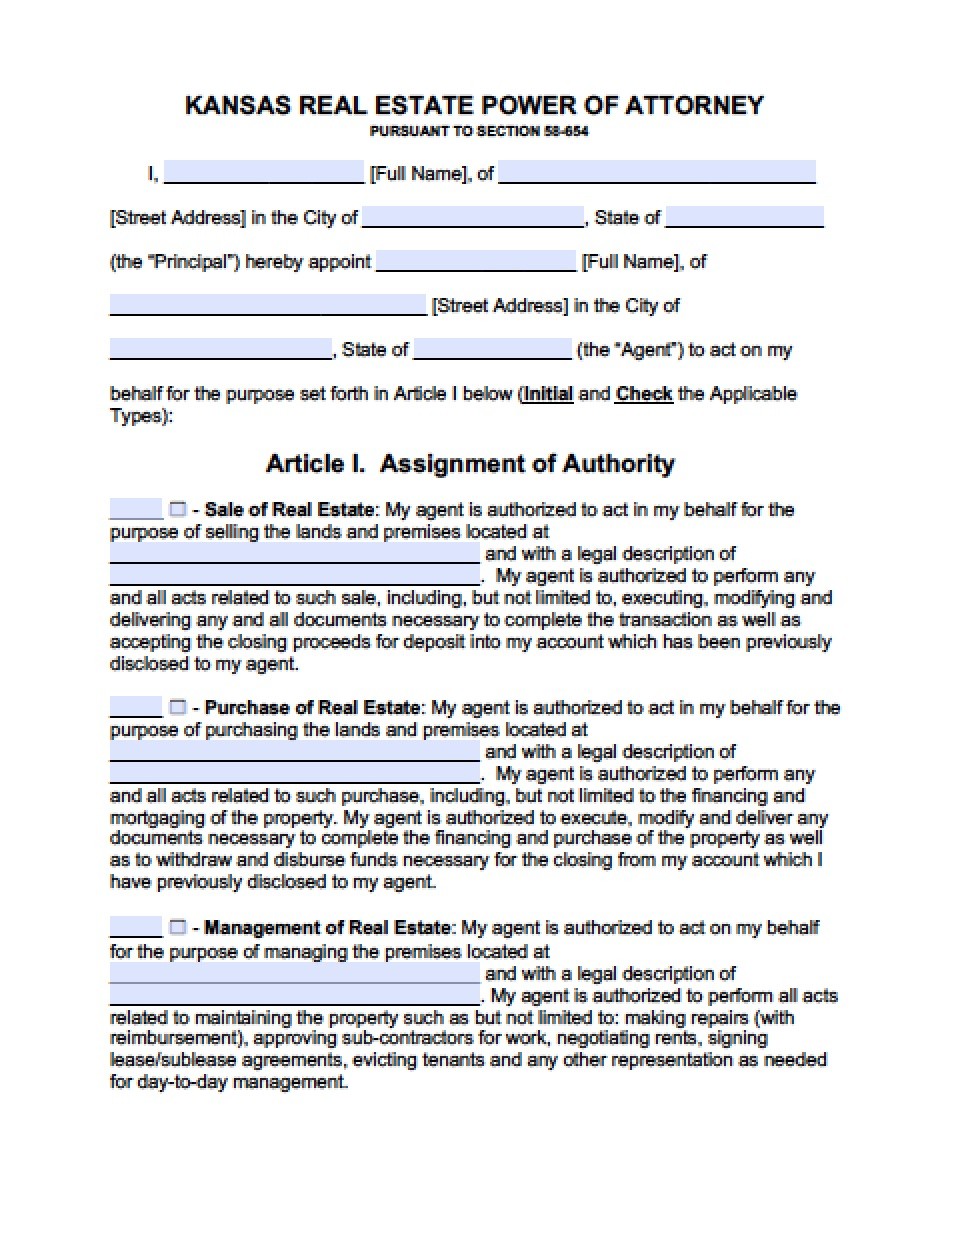 Kansas Real Estate ONLY Power Of Attorney Form Document